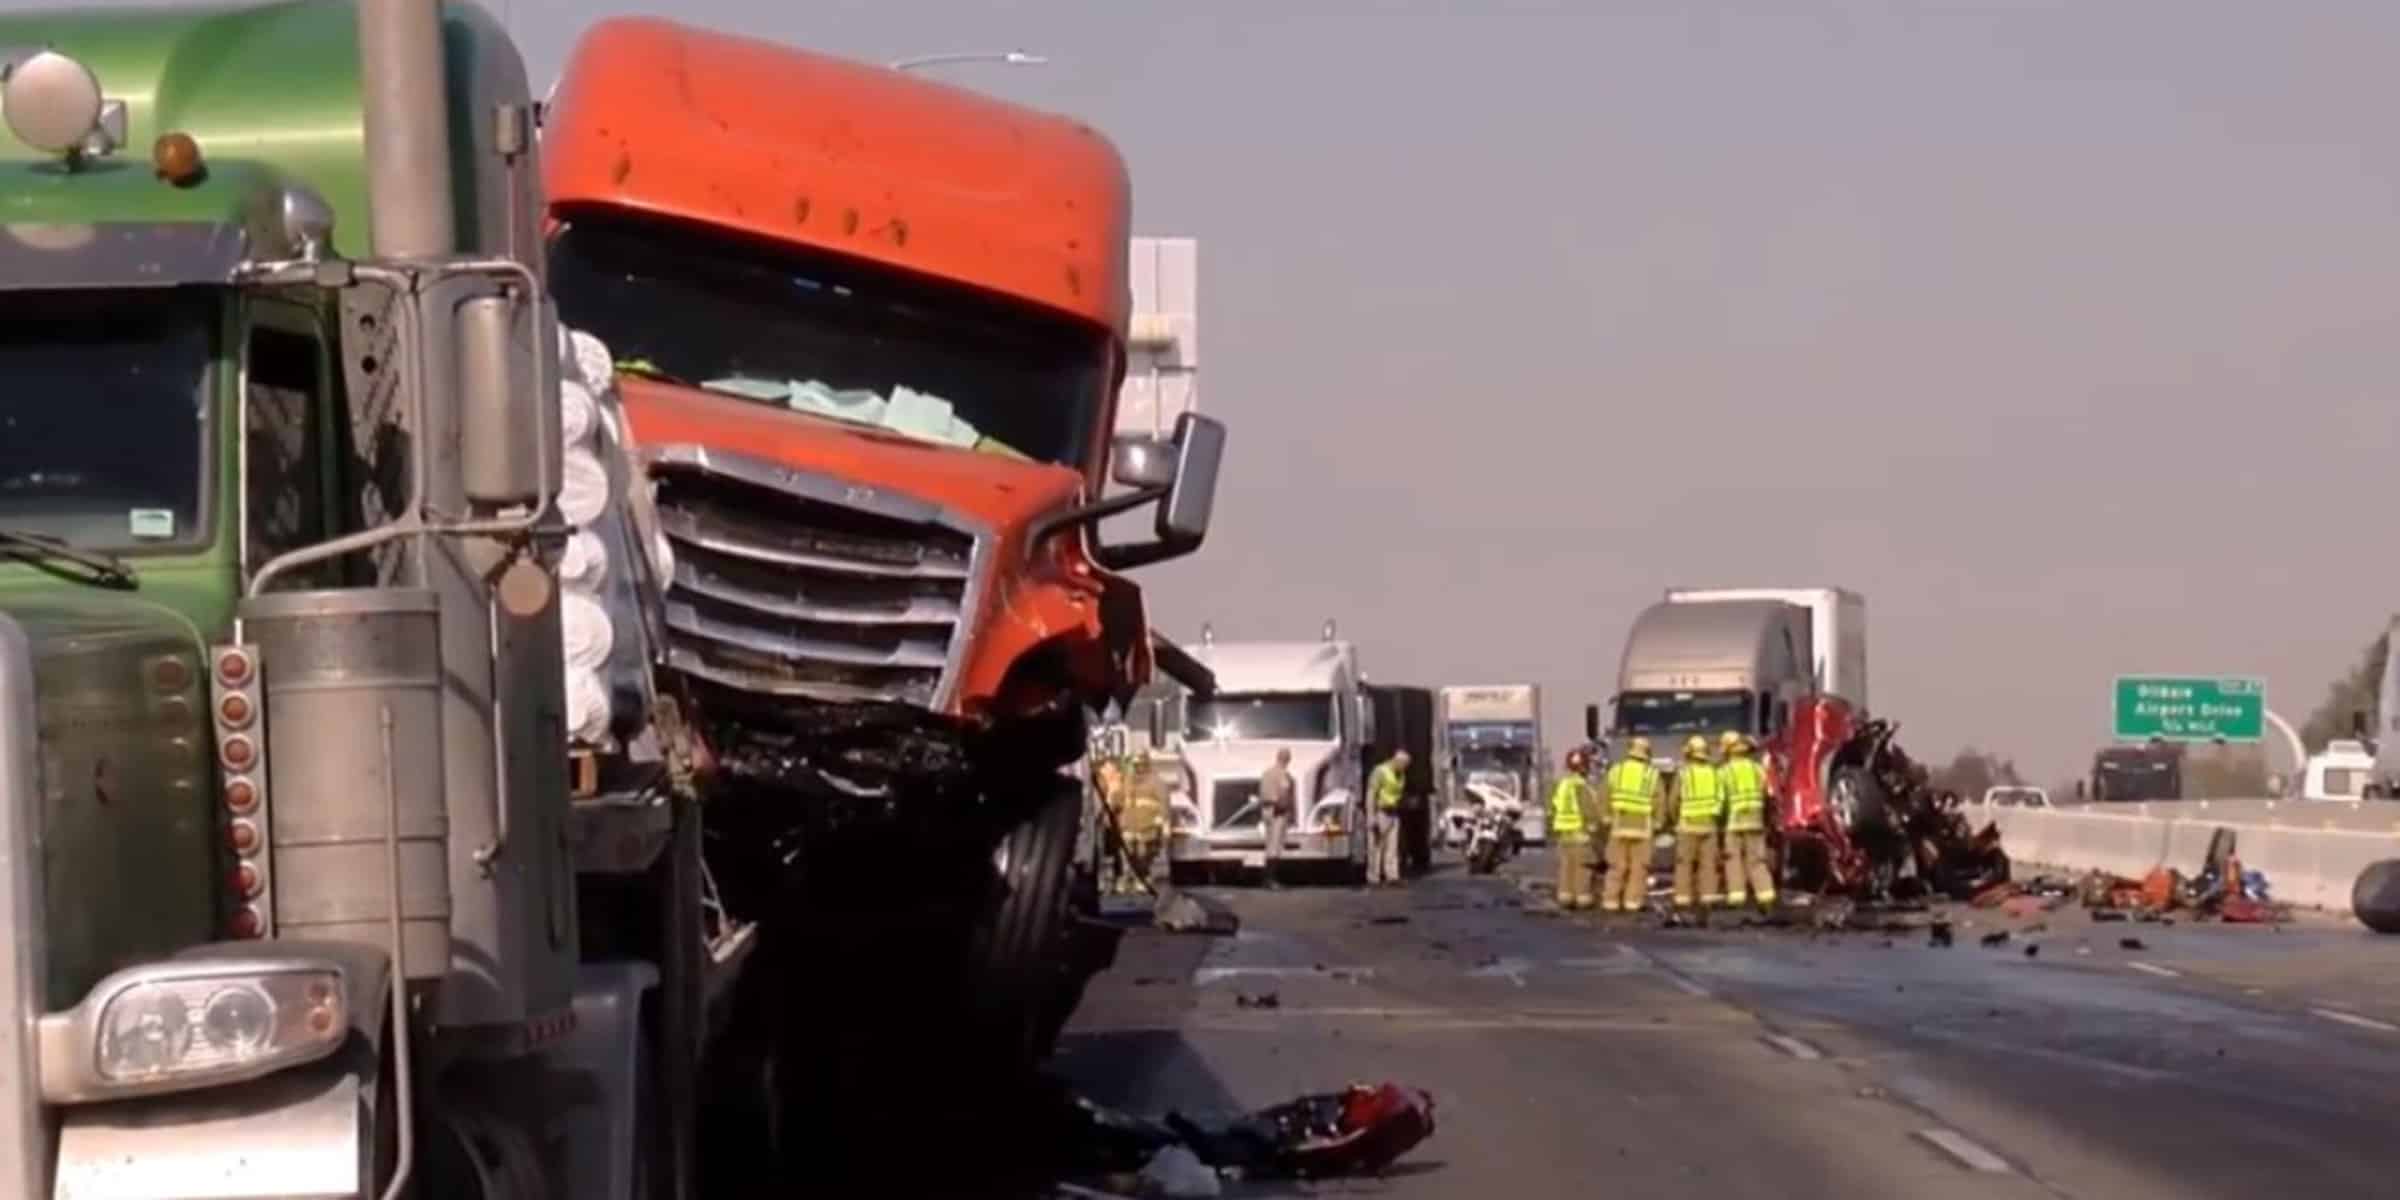 Lawsuit: Dangers of Highway 99 through Bakersfield should be addressed for safety